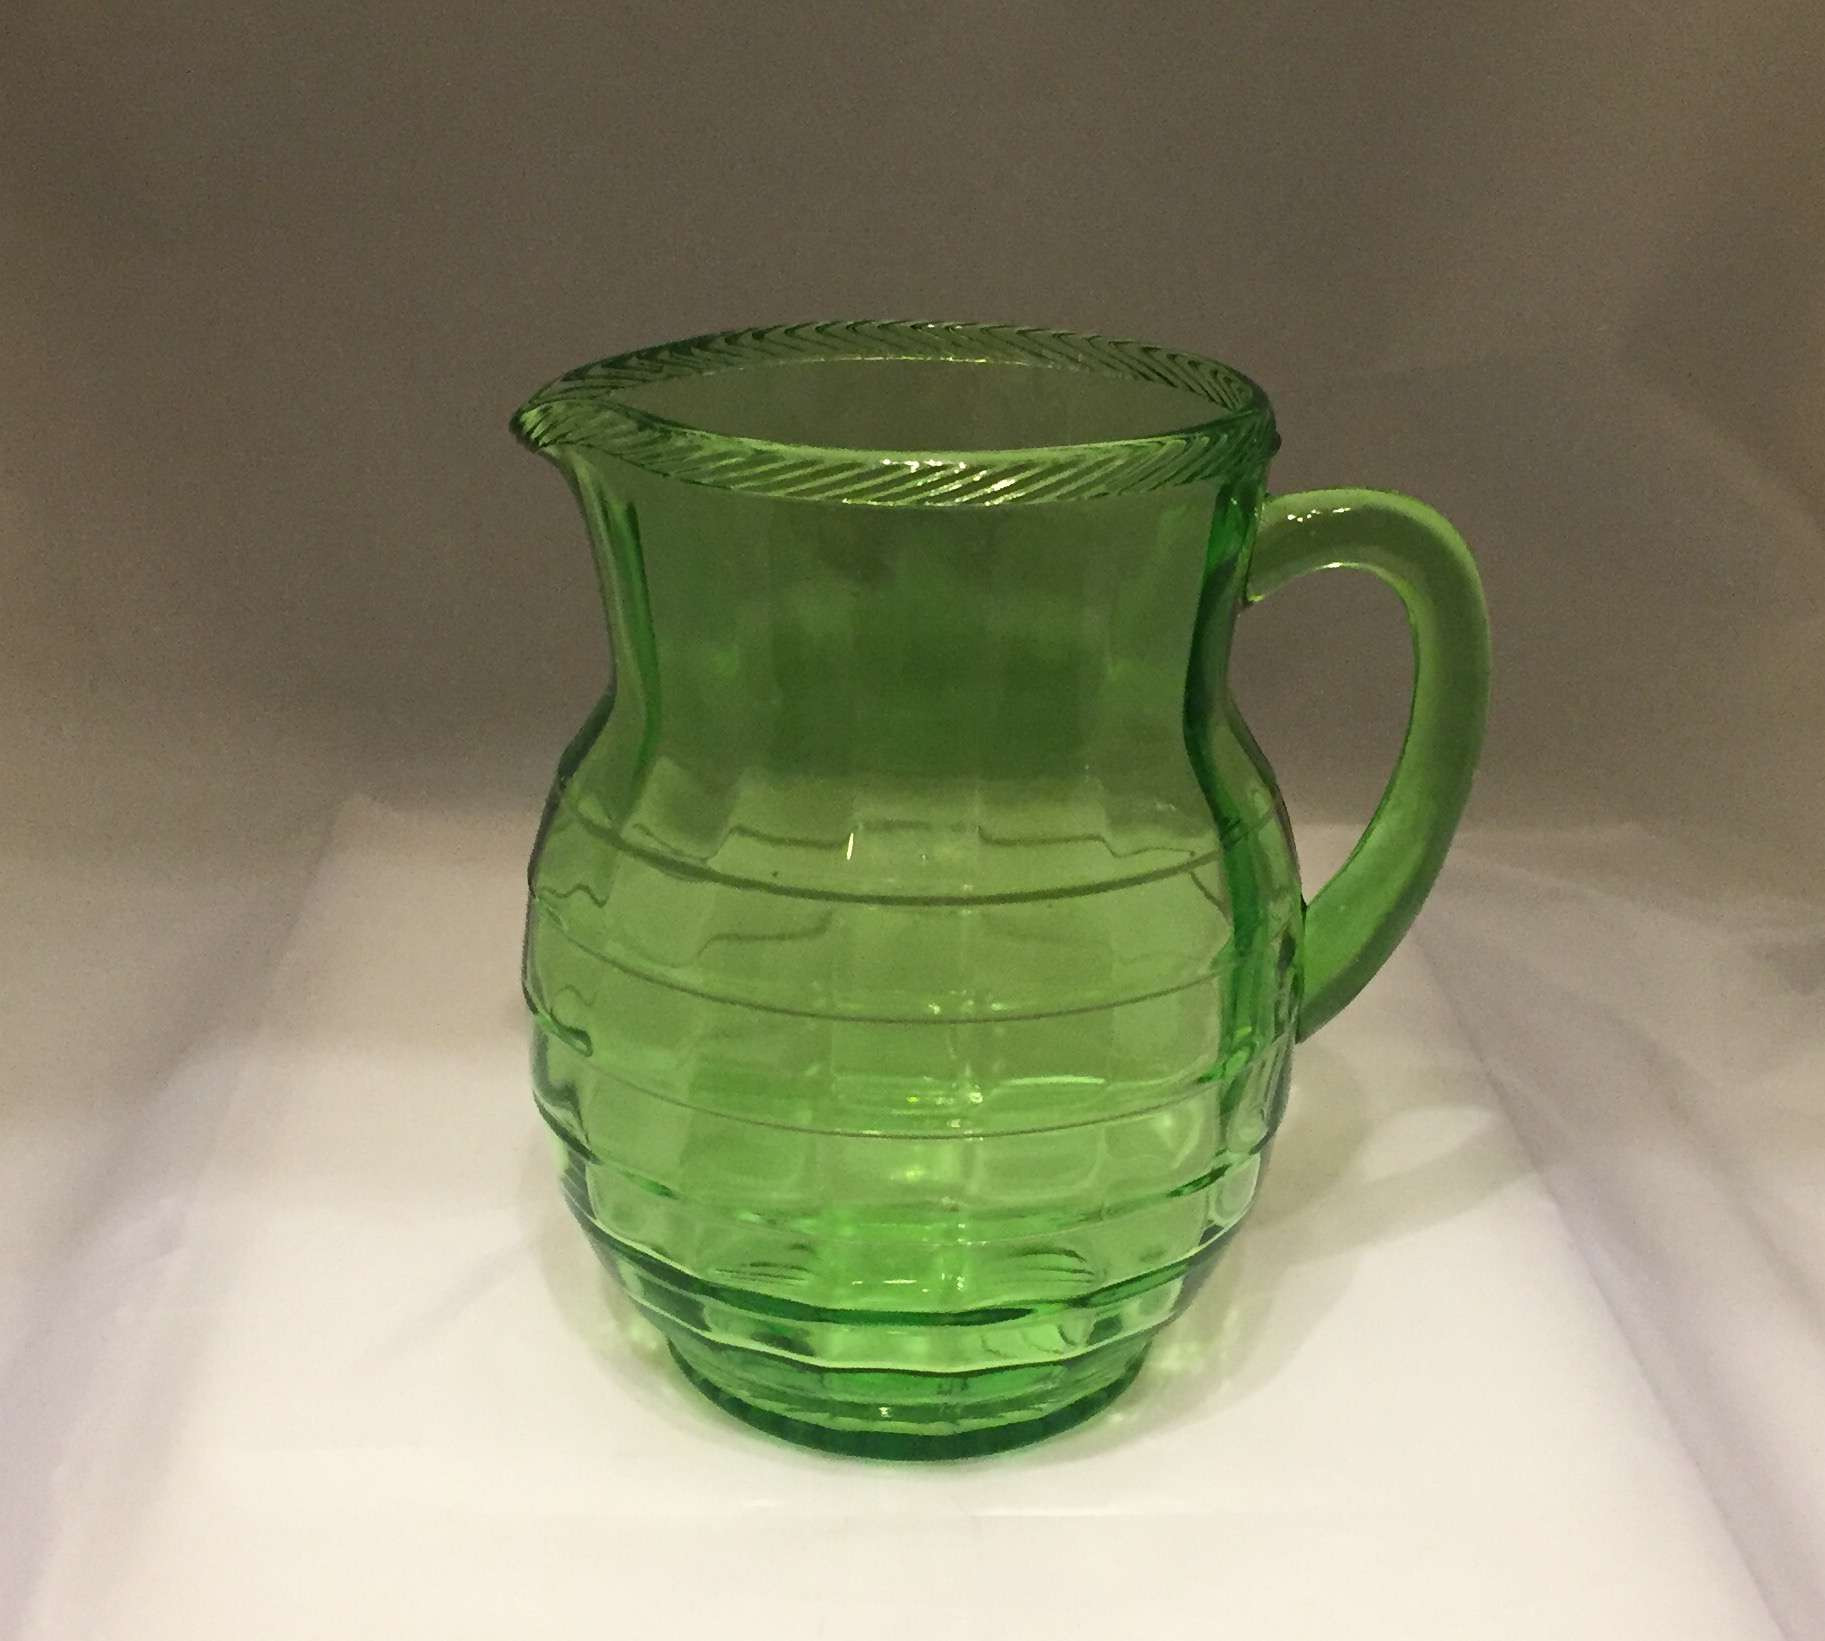 22 Awesome Glass Pedestal Bowl Vase 2023 free download glass pedestal bowl vase of depression glass price guide and pattern identification for blockpitcher 5786c8e35f9b5831b54ecdb1